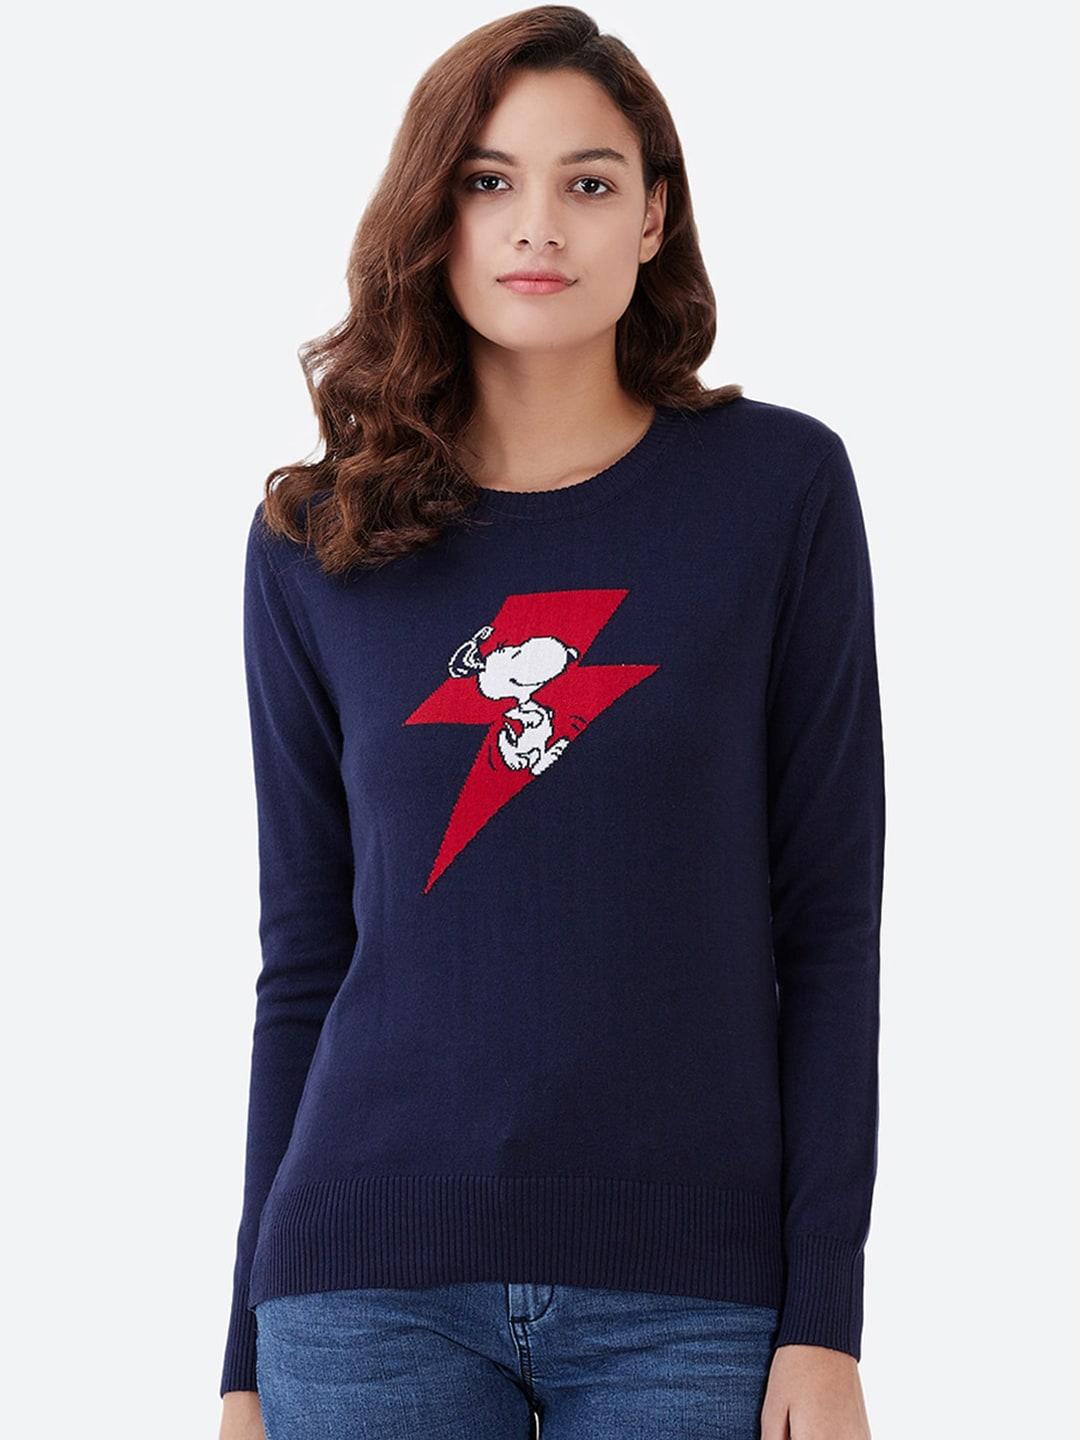 free authority peanuts featured women navy blue printed pullover